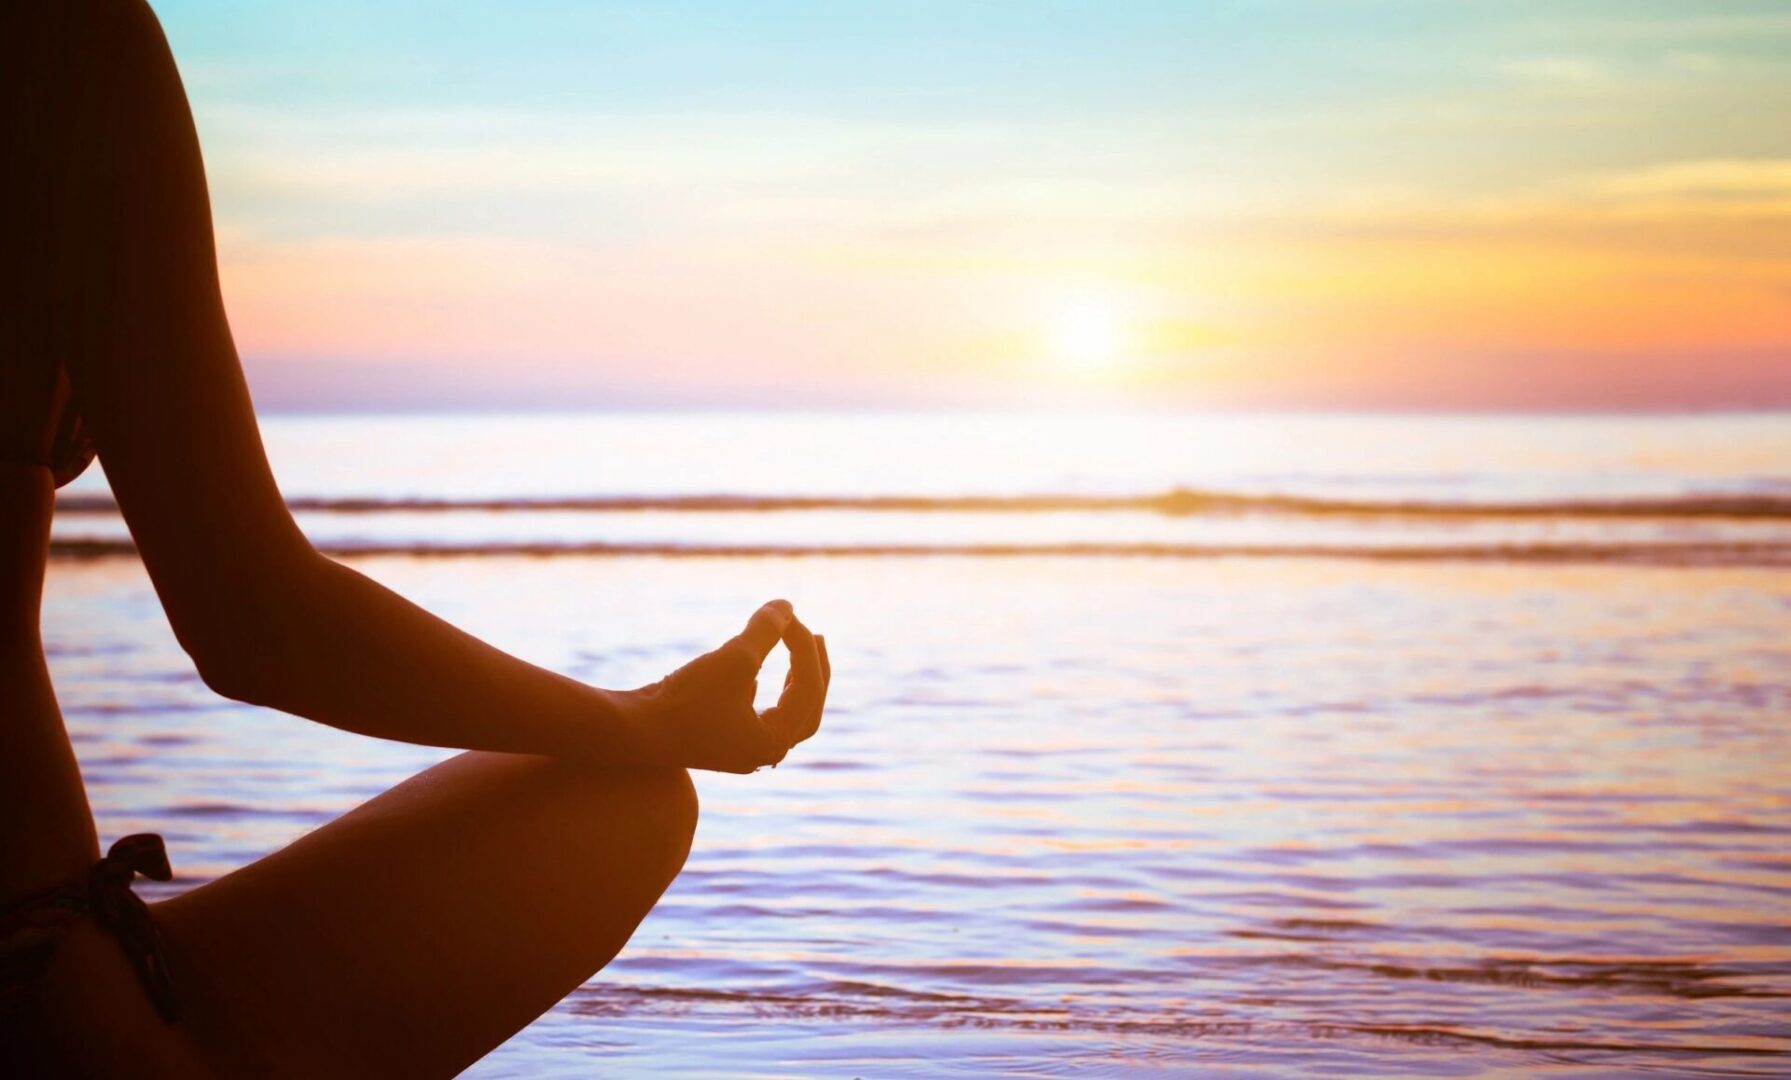 A person sitting in the lotus position on the beach